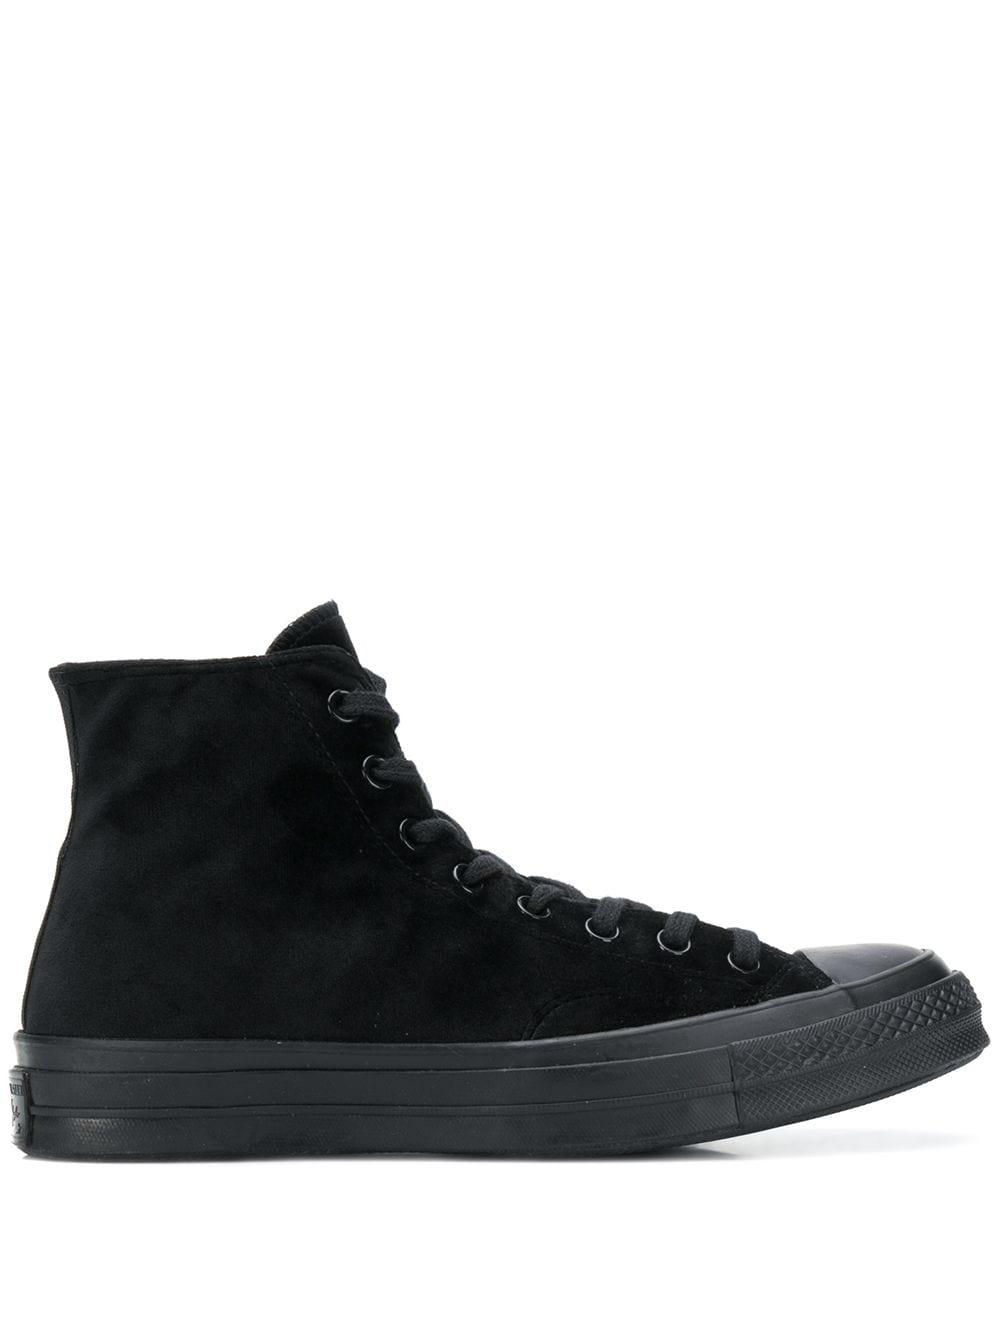 Converse Black Gore-tex® Utility Chuck 70 High Sneakers for Men | Lyst